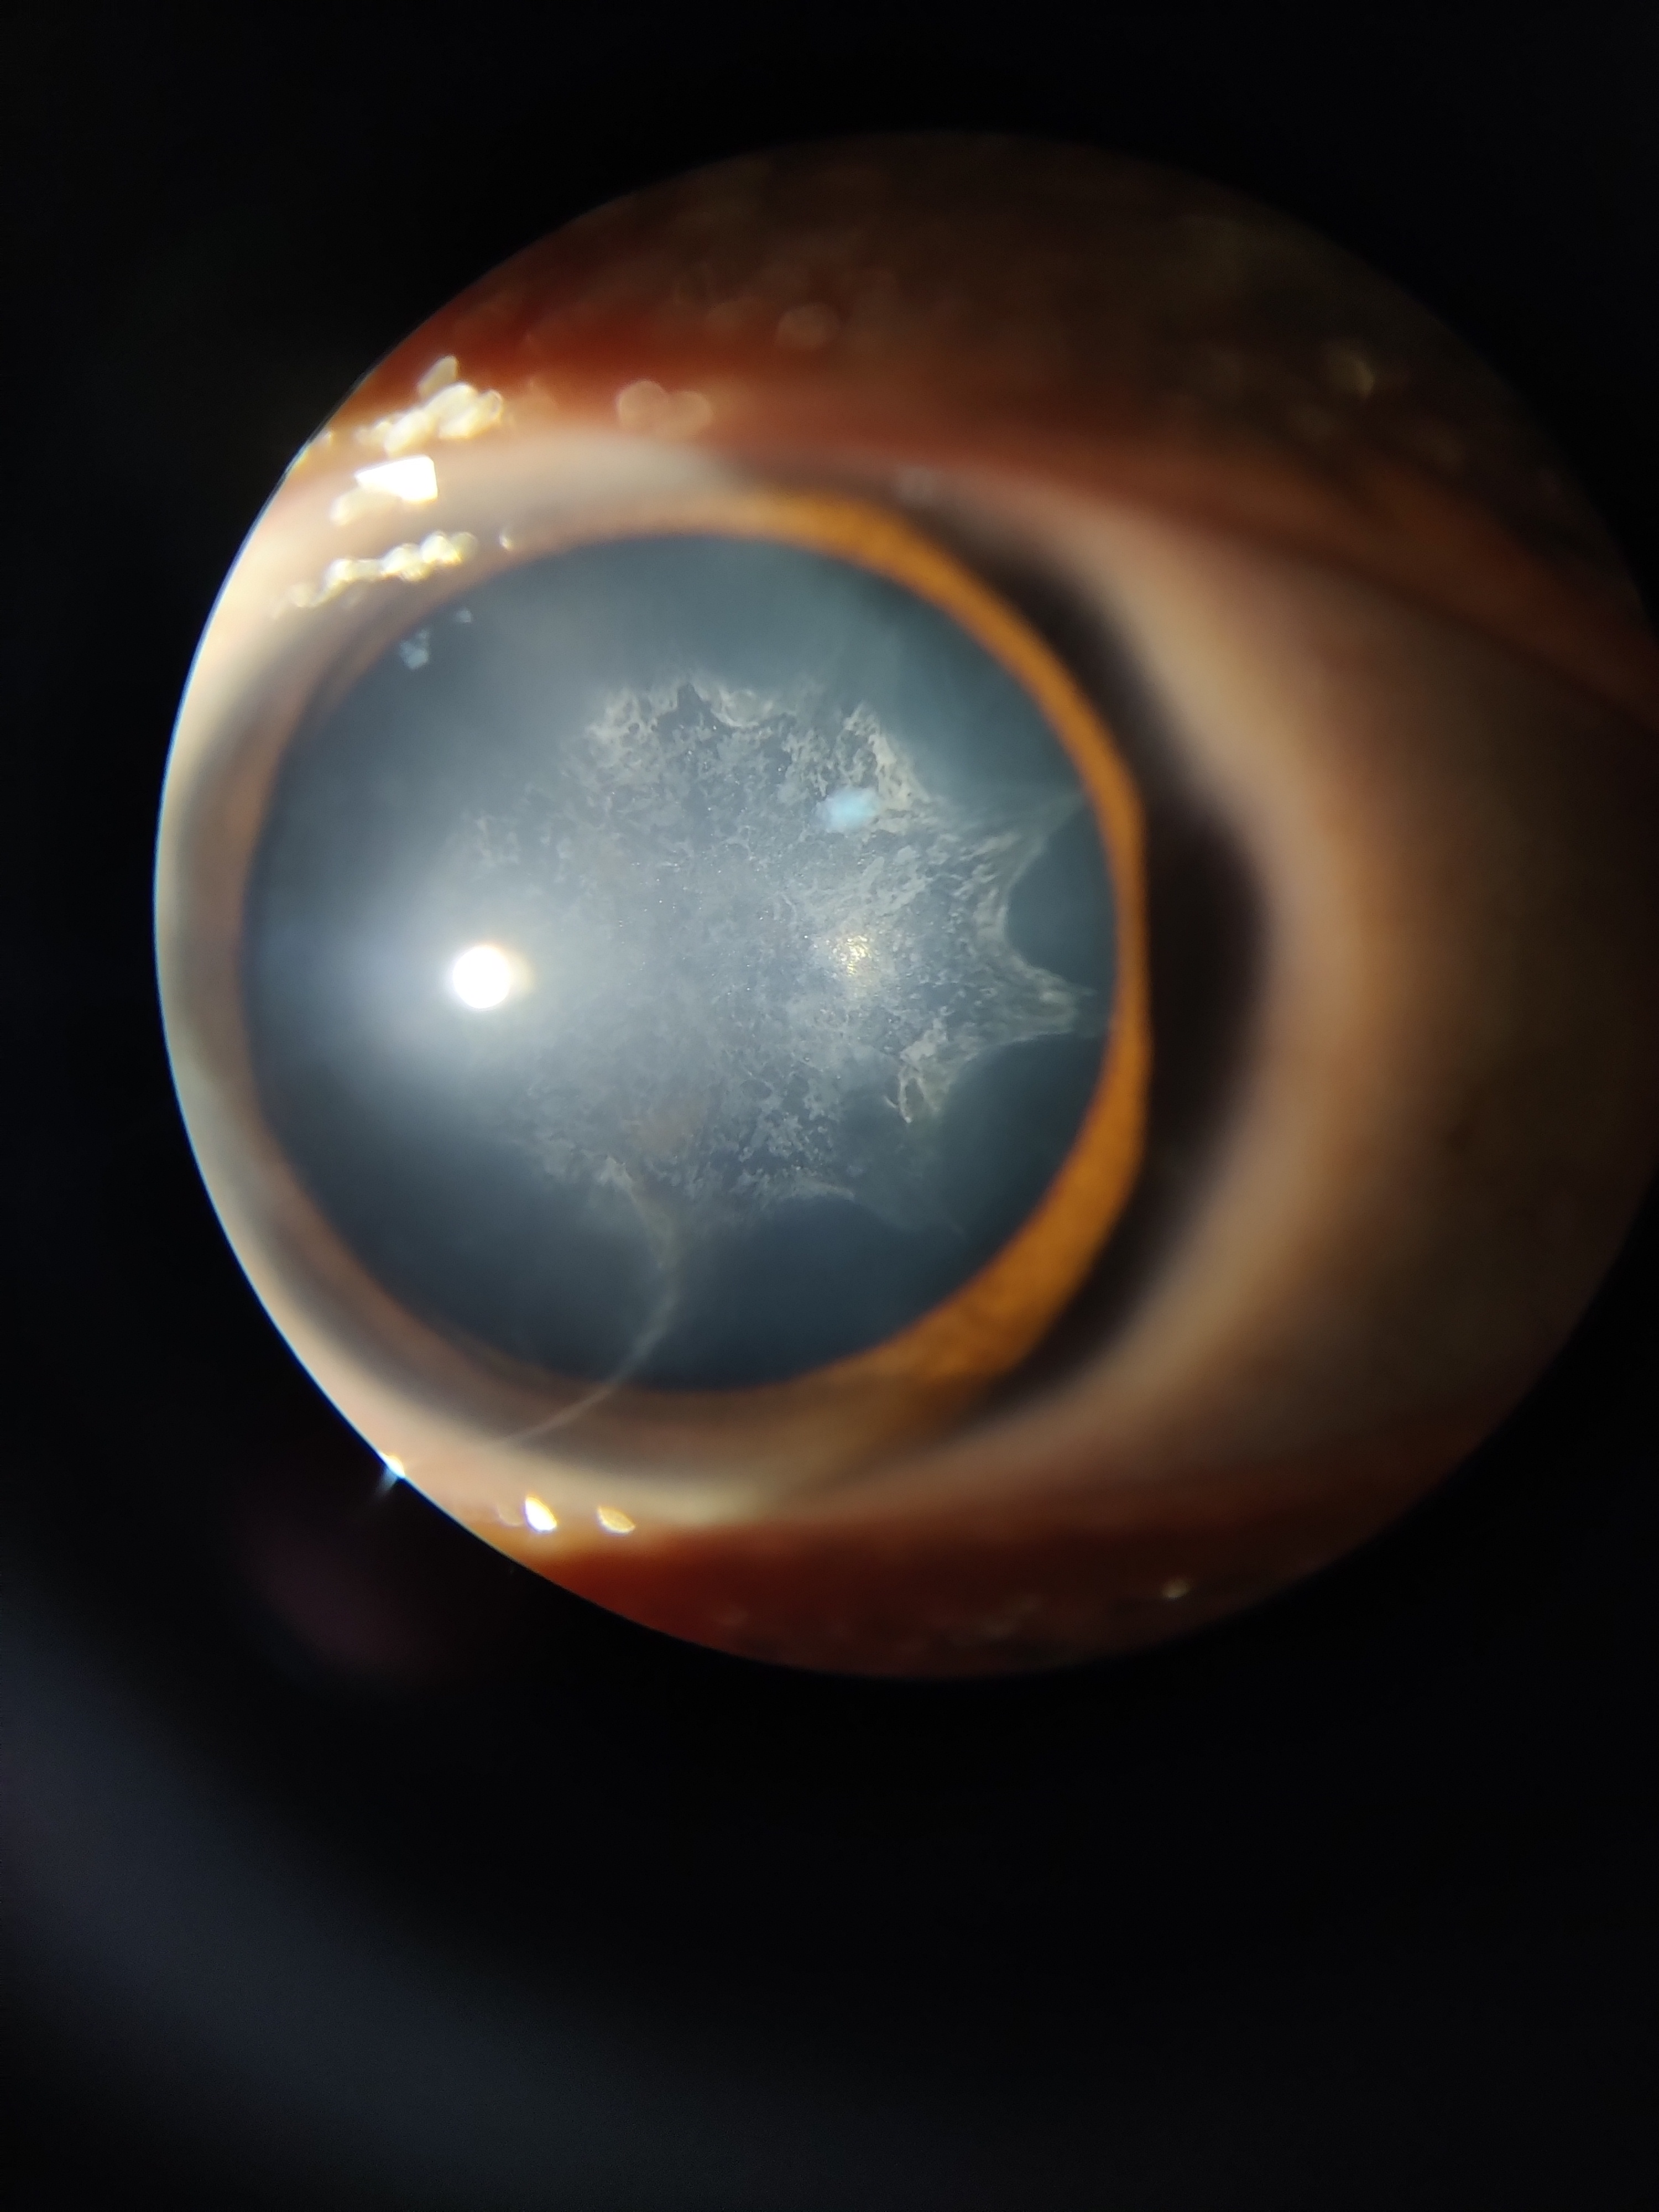 Slit lamp examination under diffuse illumination of a patient with complicated cataract reveals diffuse posterior subcapsular cataract with typical BREADCRUMB appearance and Polychromatic lusture.